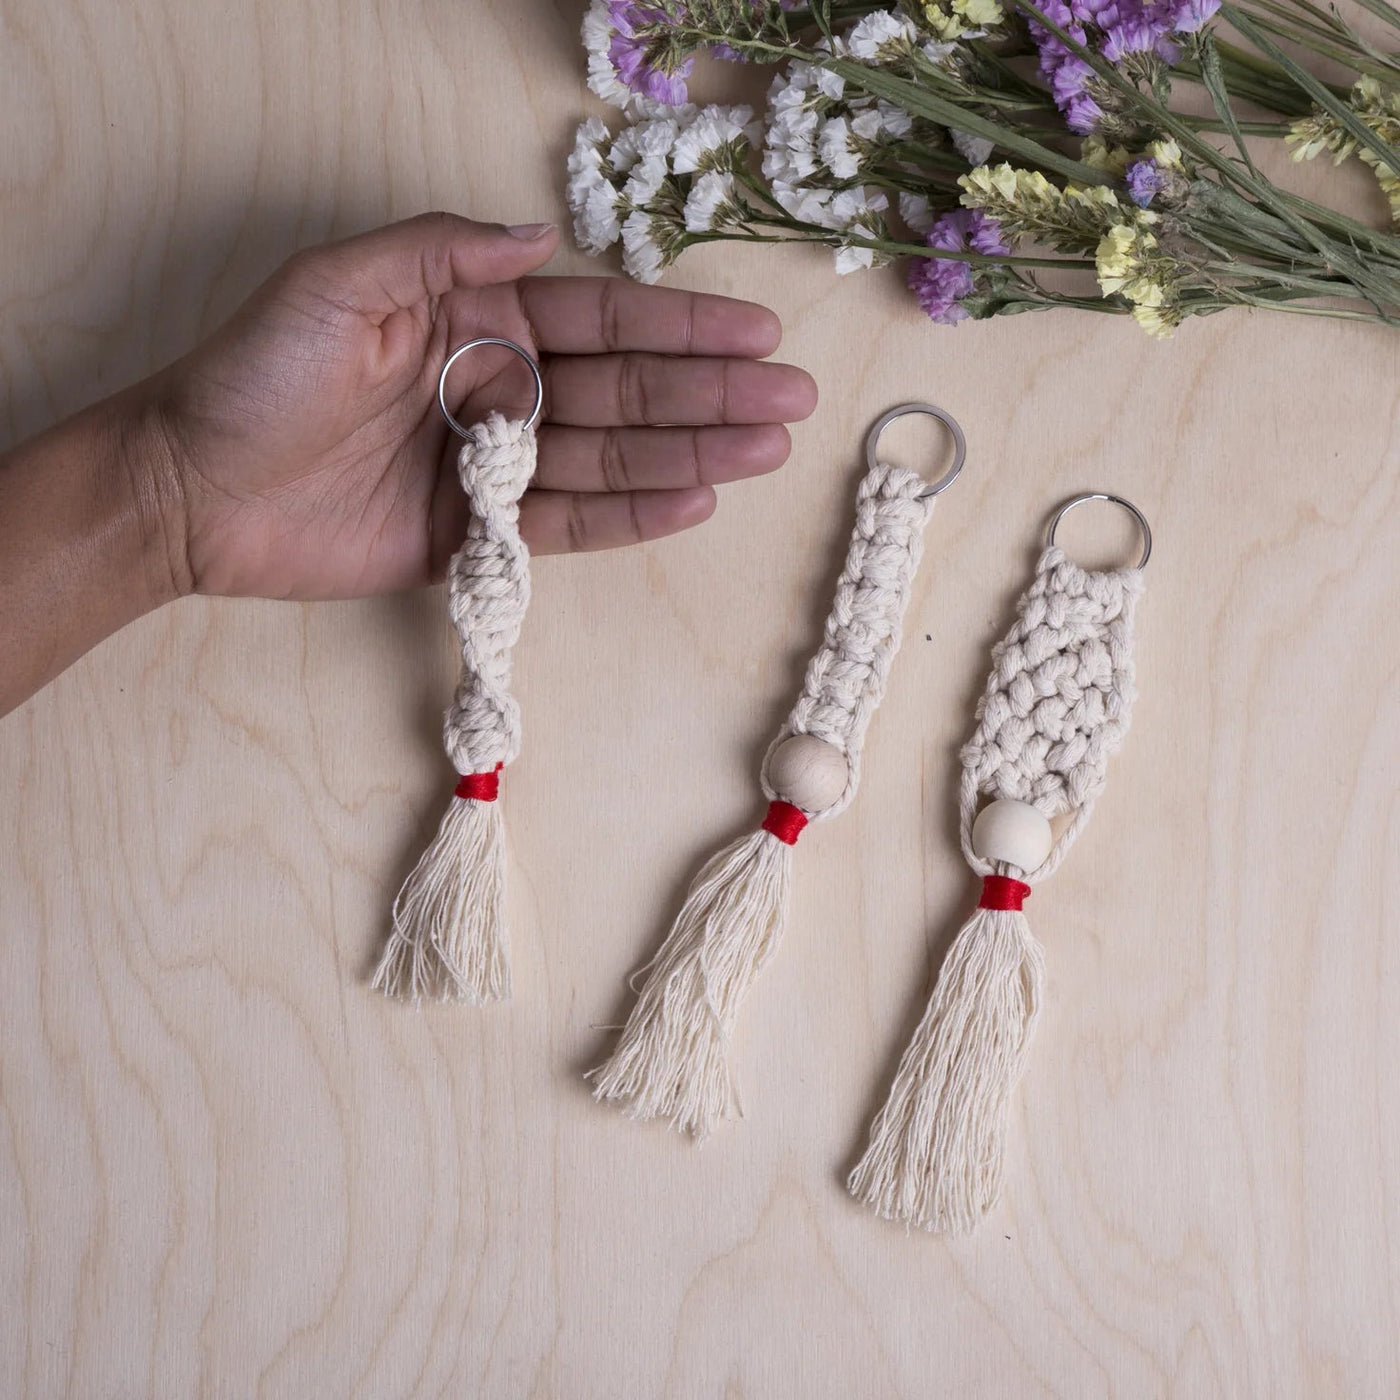 Kikkerland Crafters Macrame Keychain Kit-Gifts-Ohh! By Gum - Shop Sustainable